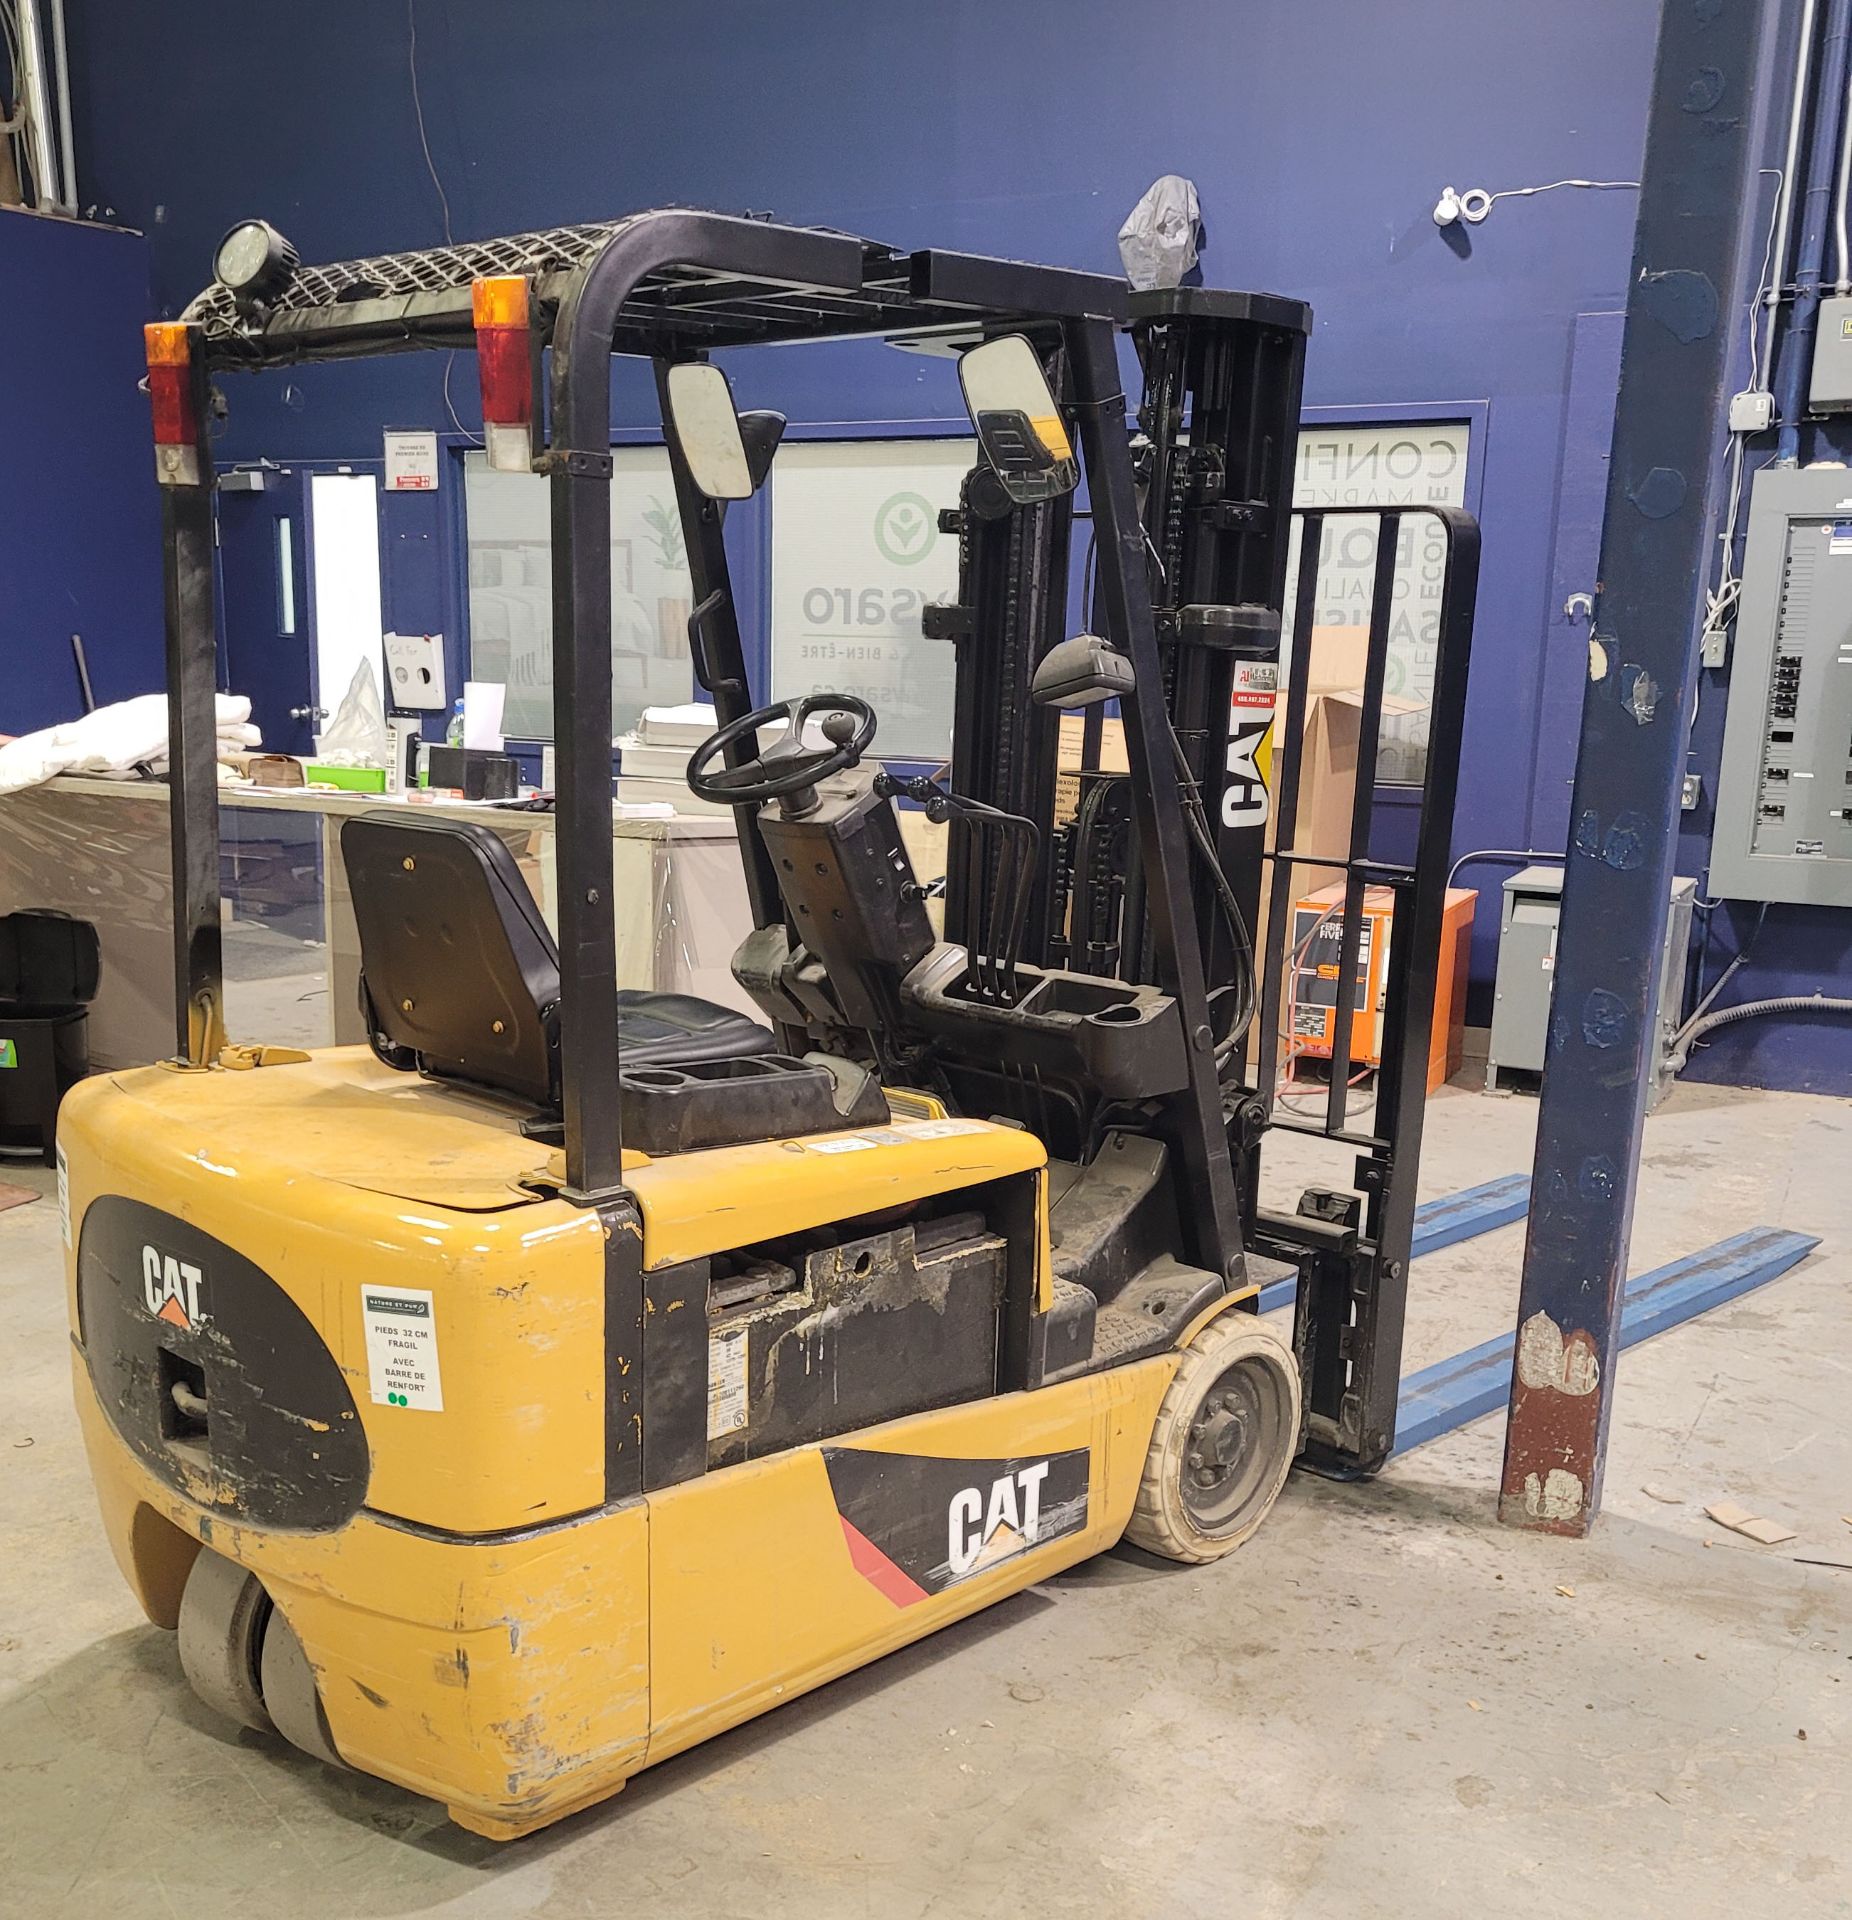 MITSUBISHI CATERPILLAR EP20KT 36V 3,950 LB CAPACITY ELECTRIC FORKLIFT WITH 188" MAXIMUM VERTICAL - Image 6 of 12